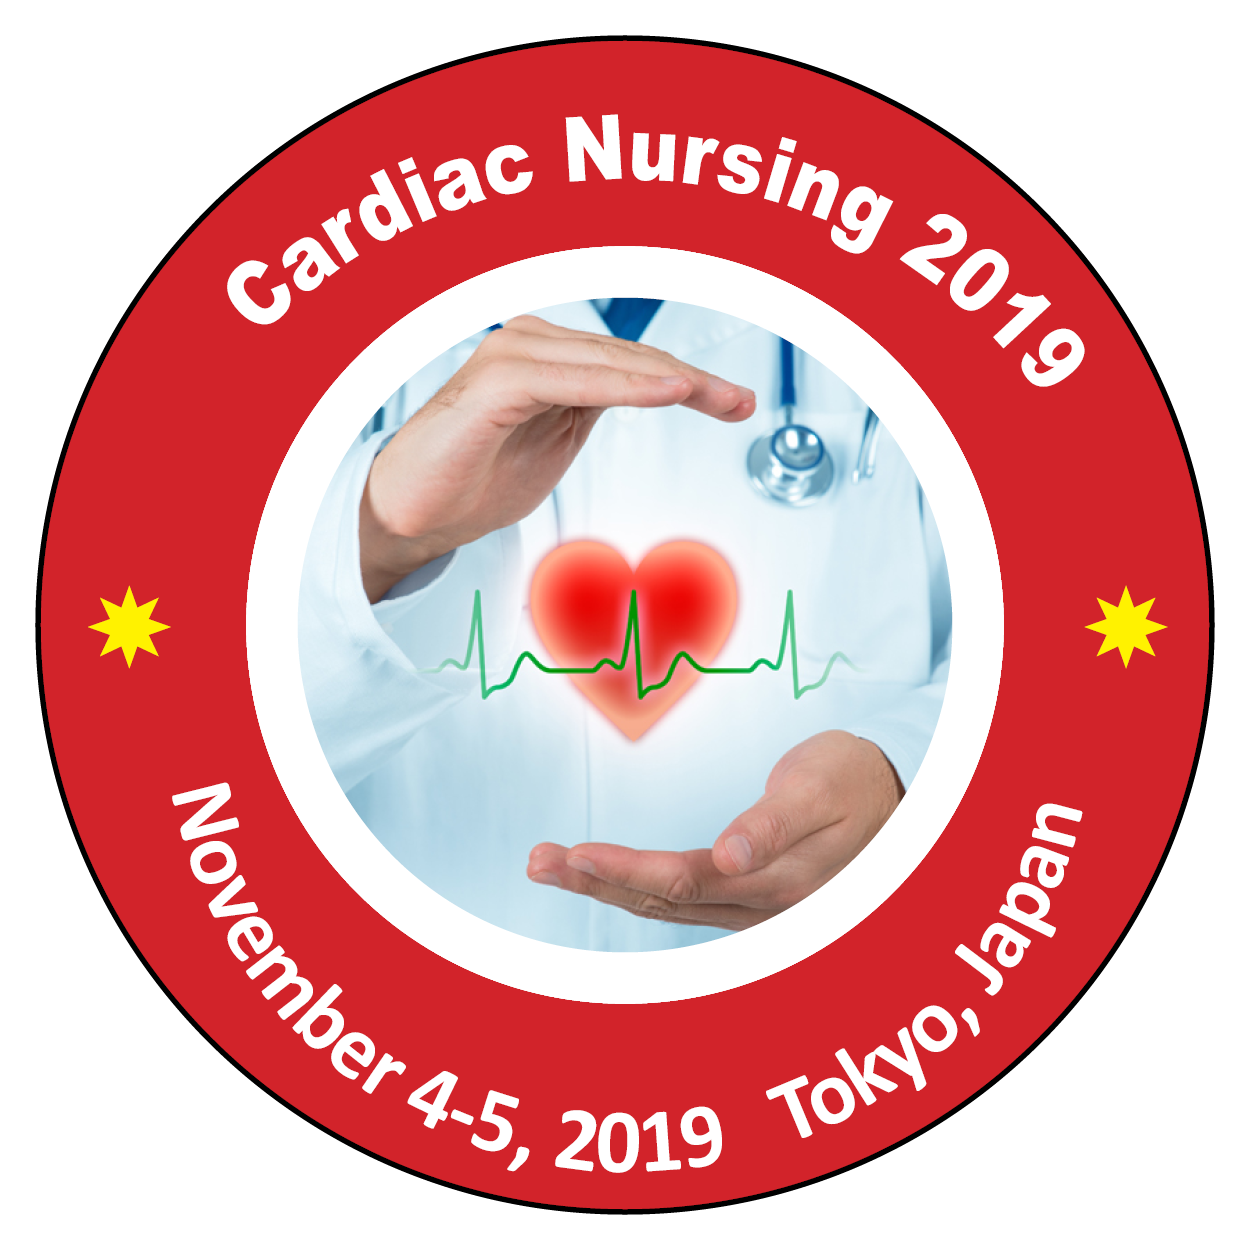 Cardiology Conference | Cardiac Nursing Conference |  Japan Events | Cardiology Meetings | Asia Pacific | Europe | USA |2019